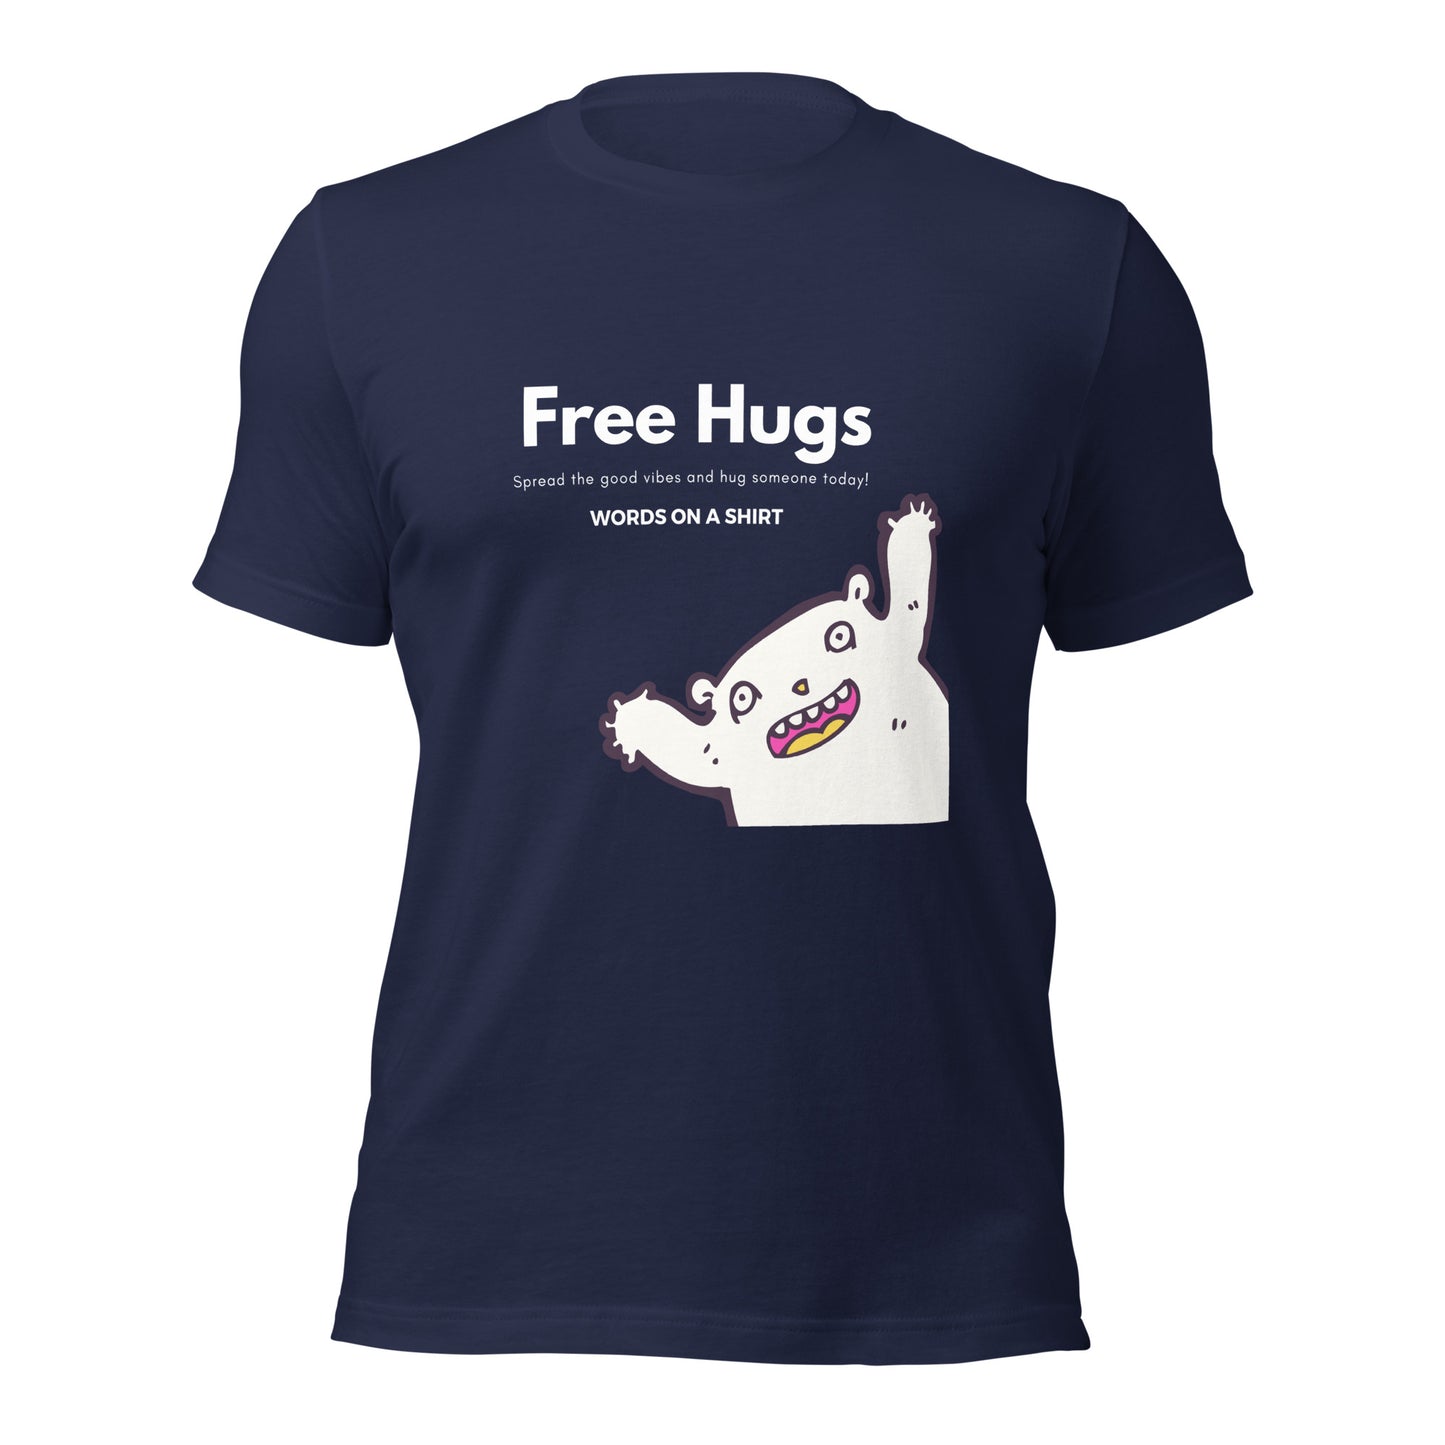 Don't miss out on this chance to snag the ultimate cotton tee. Pre-shrunk, side-seamed and perfectly tailored - this piece of apparel is ready to conquer! Take the plunge with our Free Hugs Collection and join the revolution!